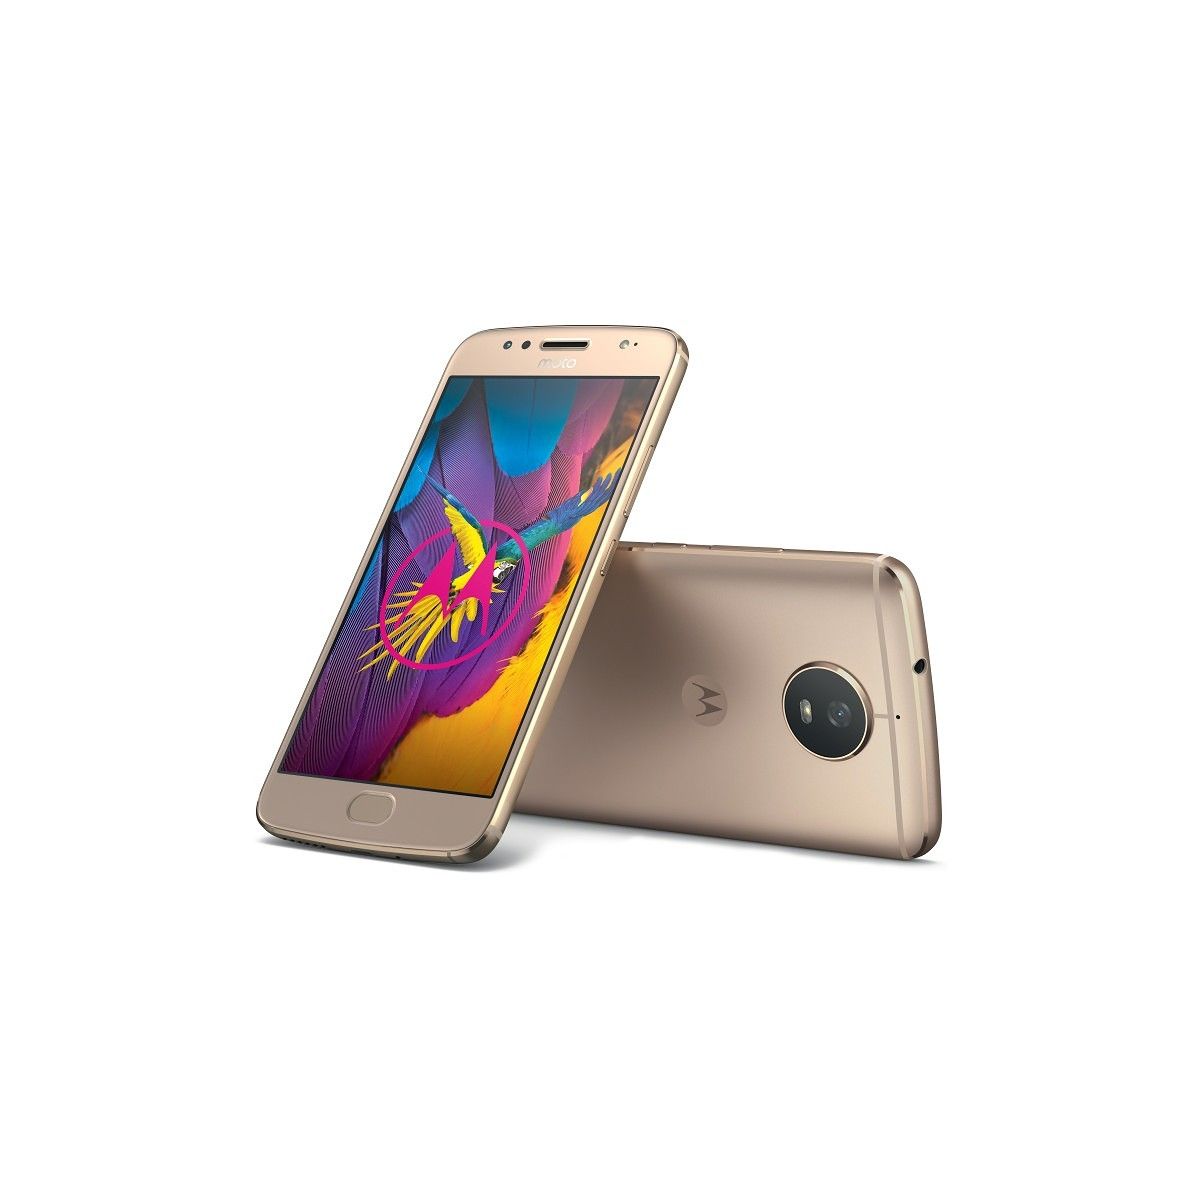 Moto G5S Android Oreo flashable images now available for all regions